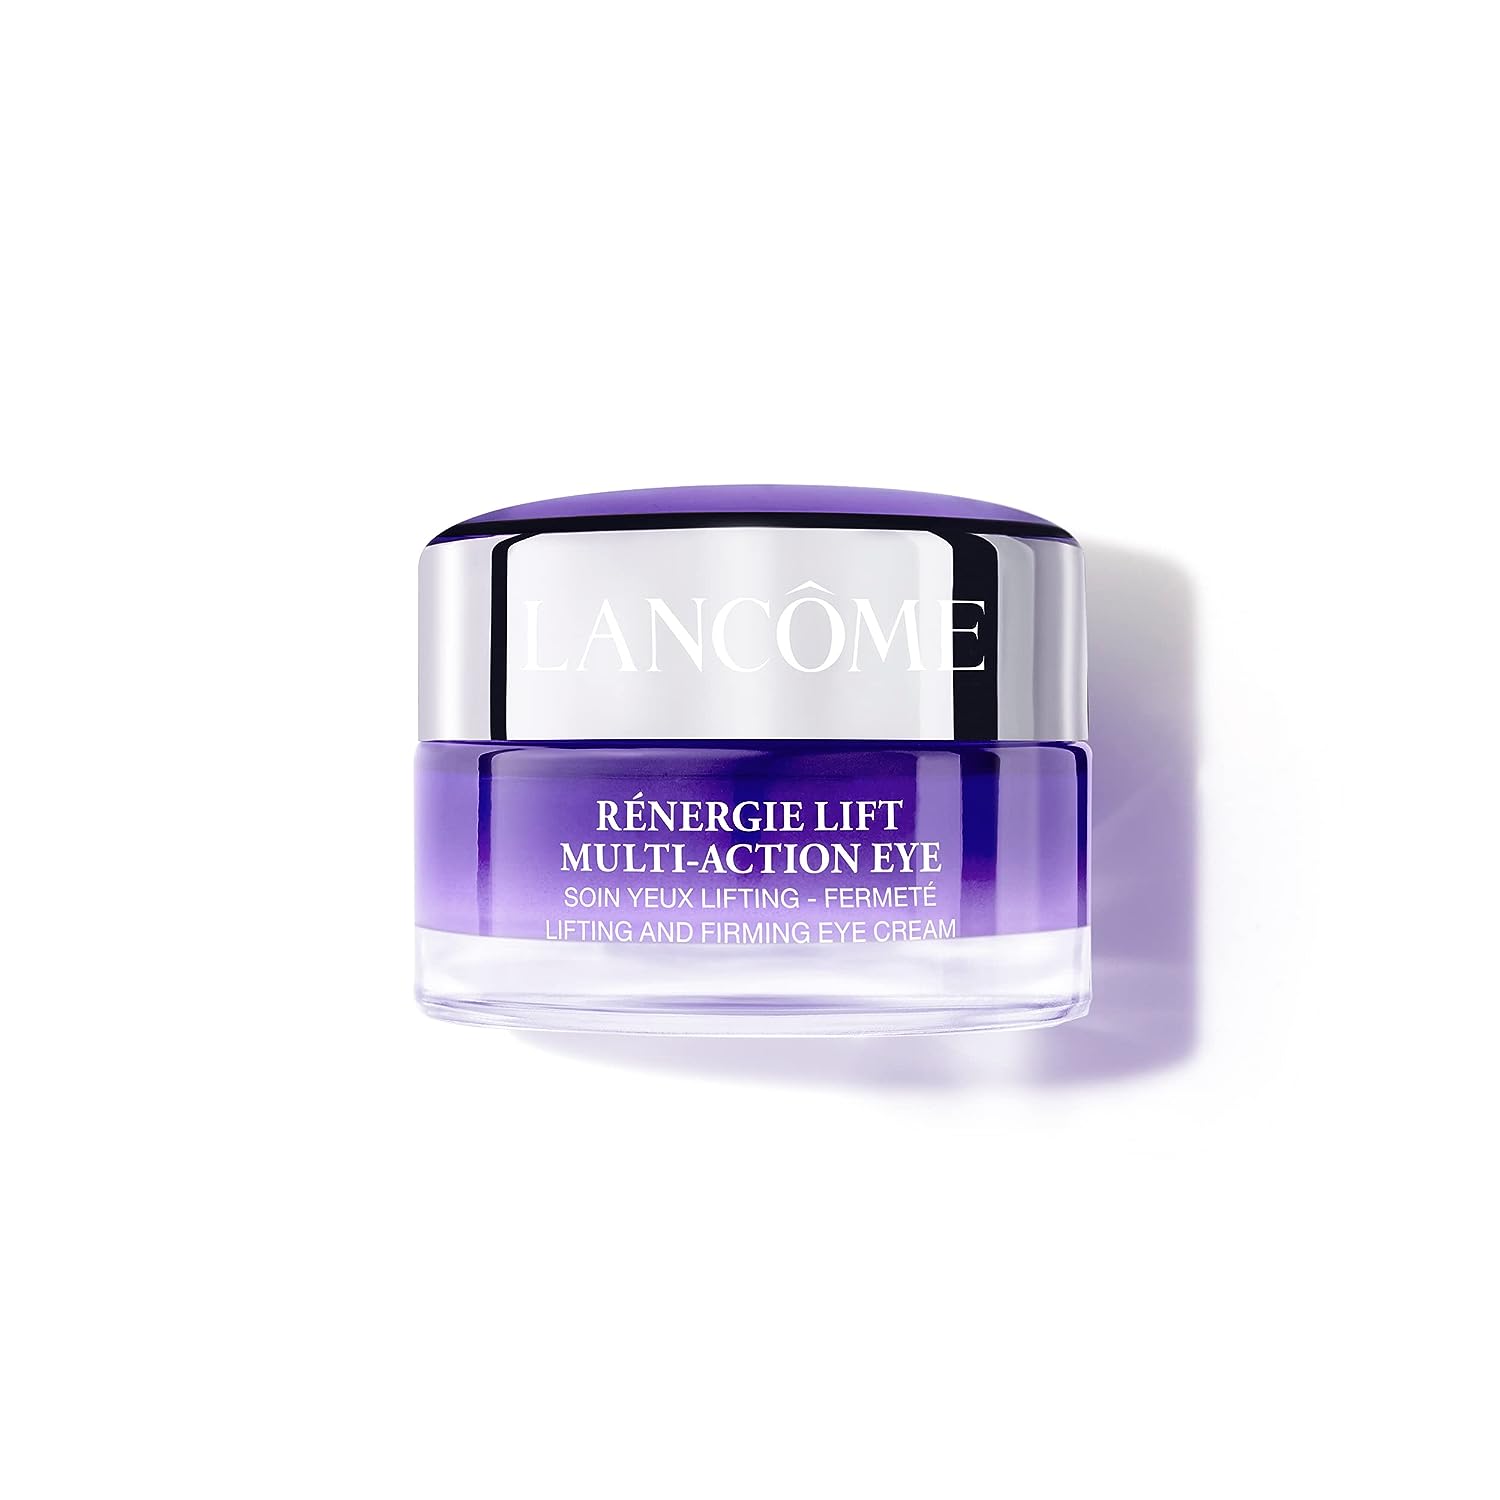 Lancôme Rénergie Lift Multi-Action Eye Cream - For Lifting & Firming - With Caffeine, Hyaluronic Acid & Shea Butter - 0.5